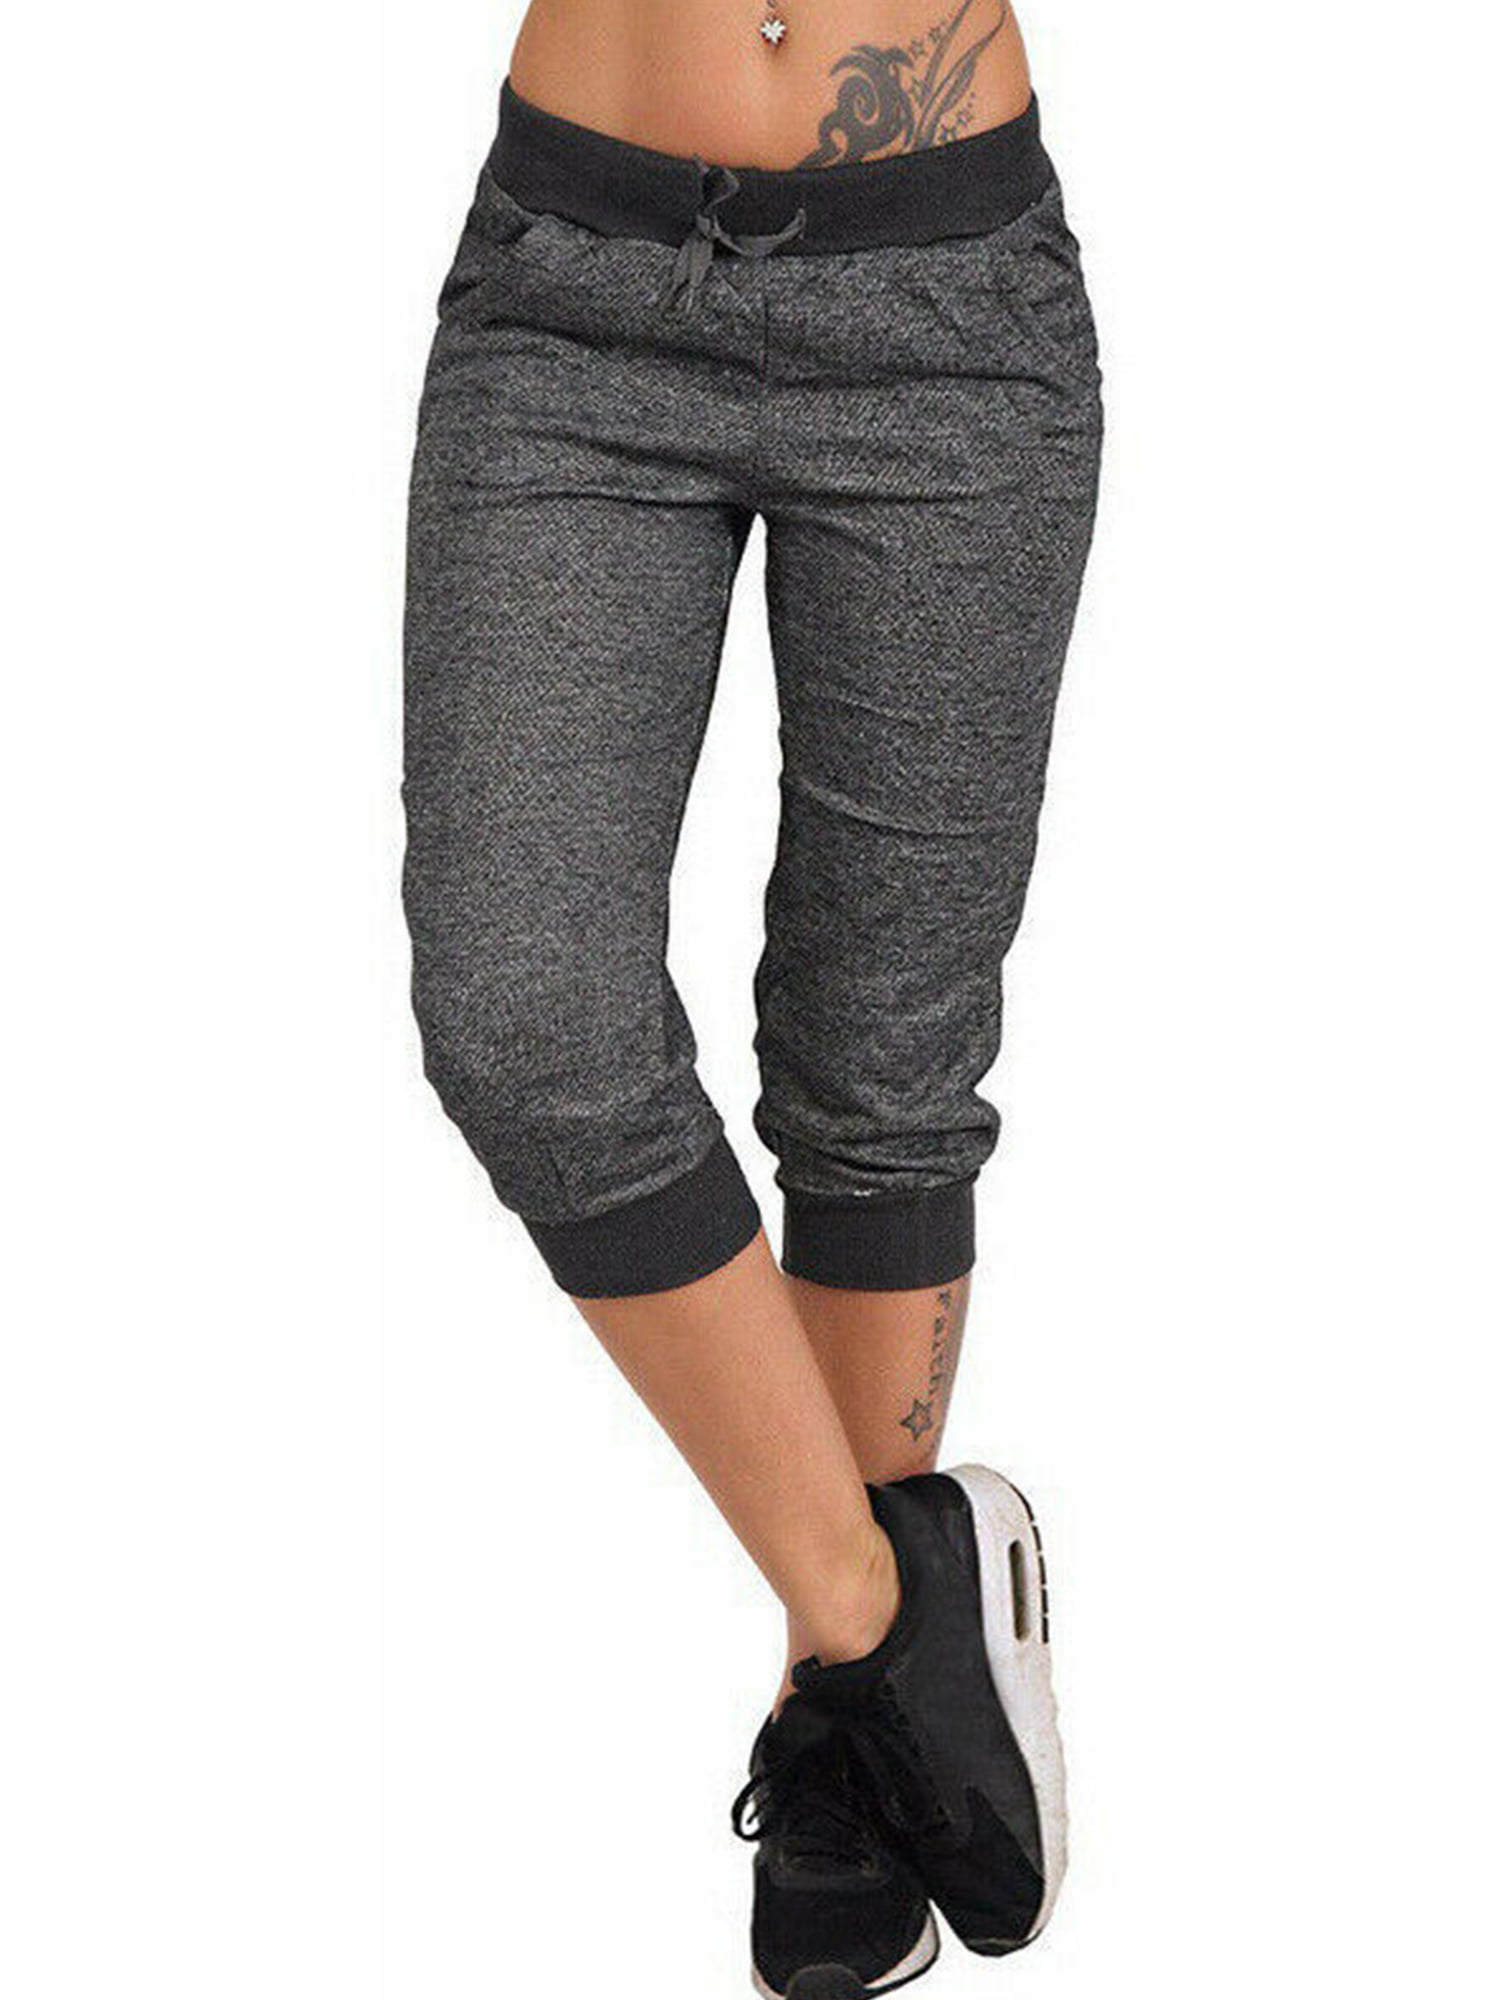 Details about   Womens 3/4 Capri Yoga Pants Pockets Leggings Trousers Sports Cropped Fitness Gym 